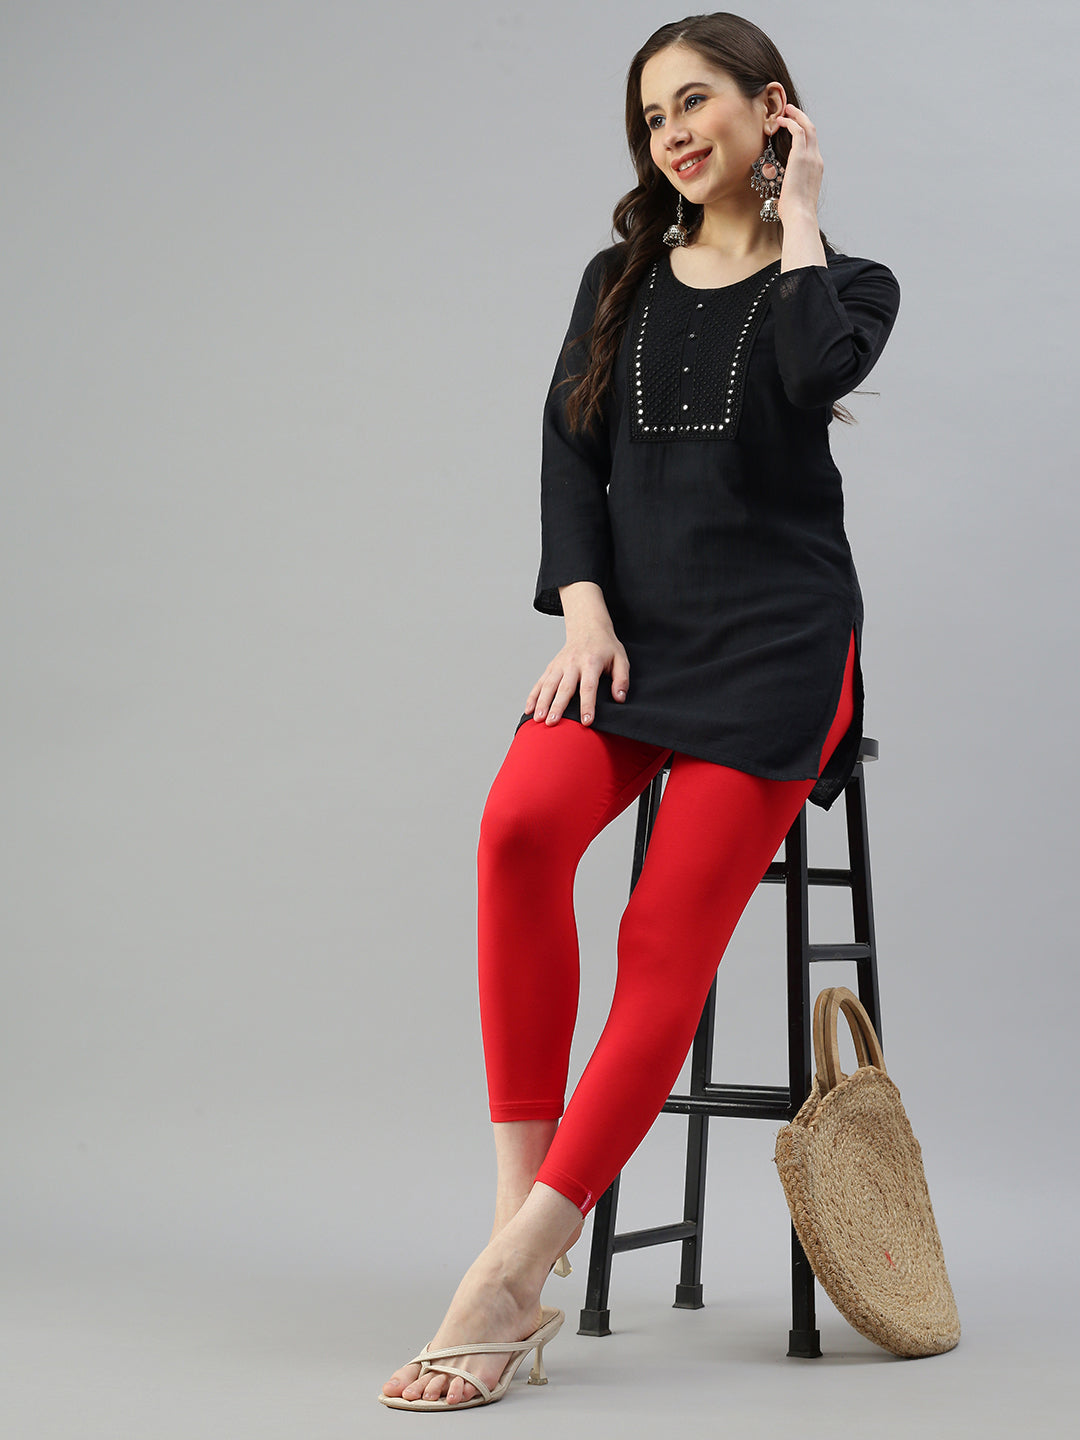 Discover more than 147 black kurti and red leggings best - netgroup.edu.vn